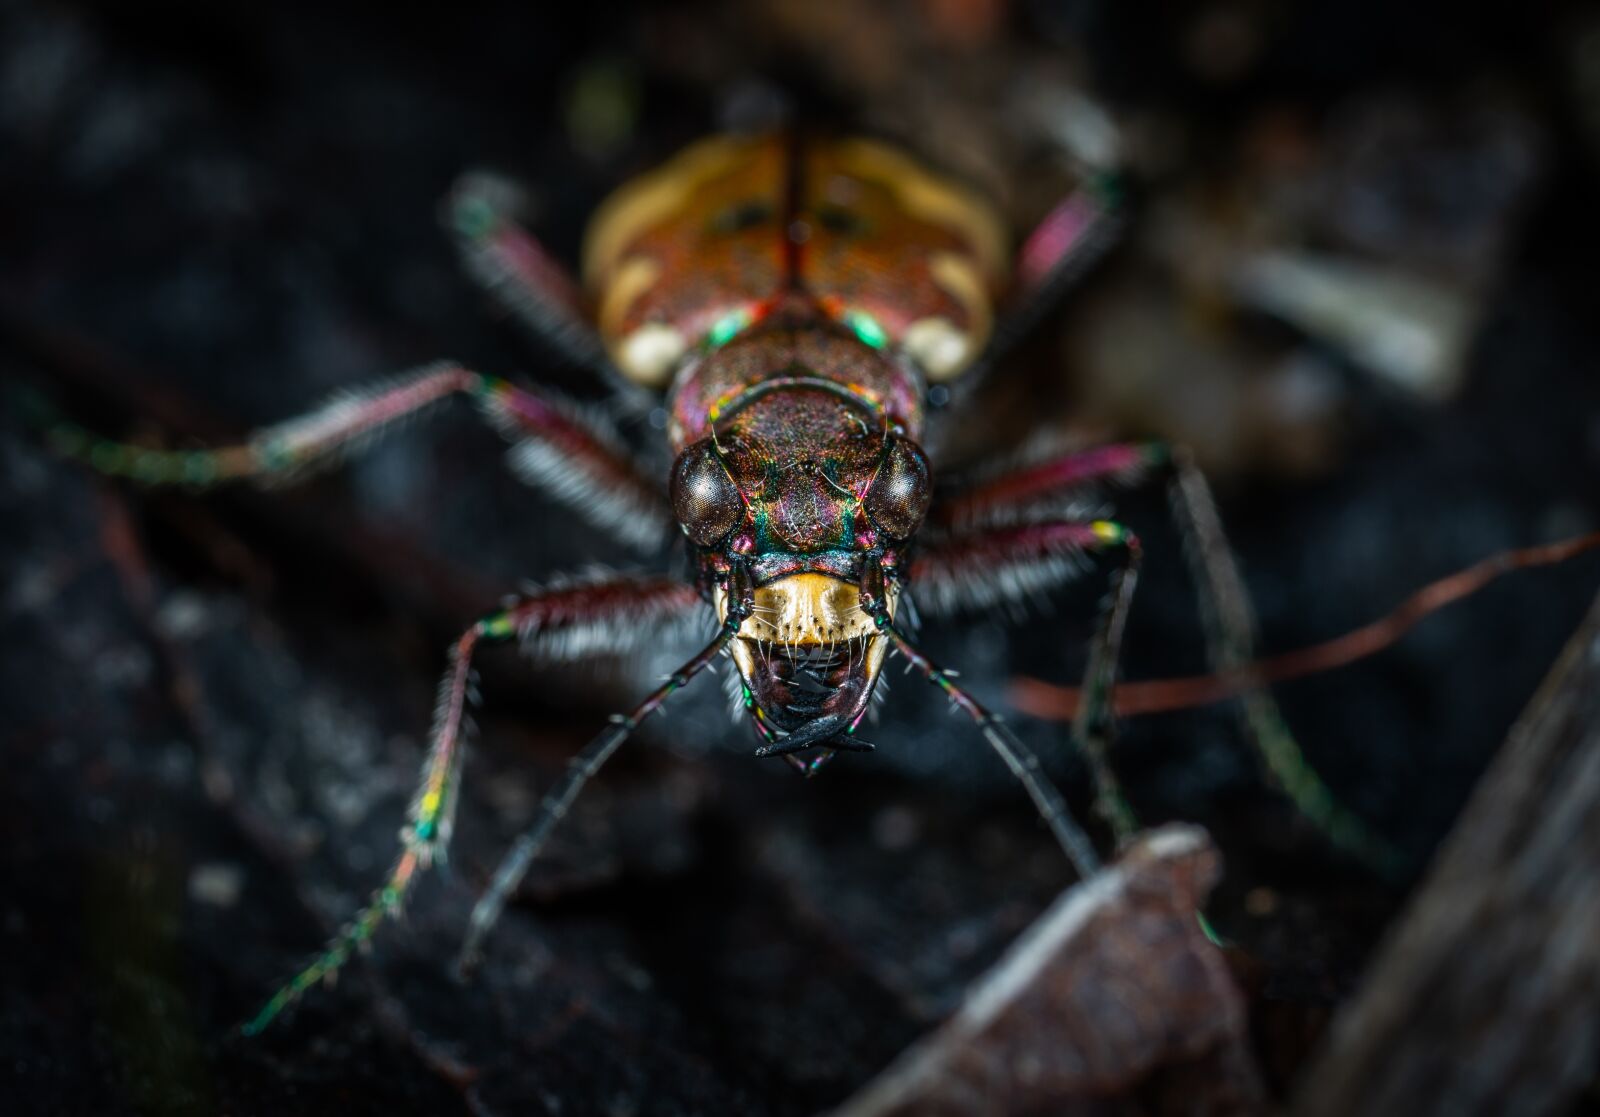 Sony a7R II sample photo. Bespozvonochnoe, insect, nature photography